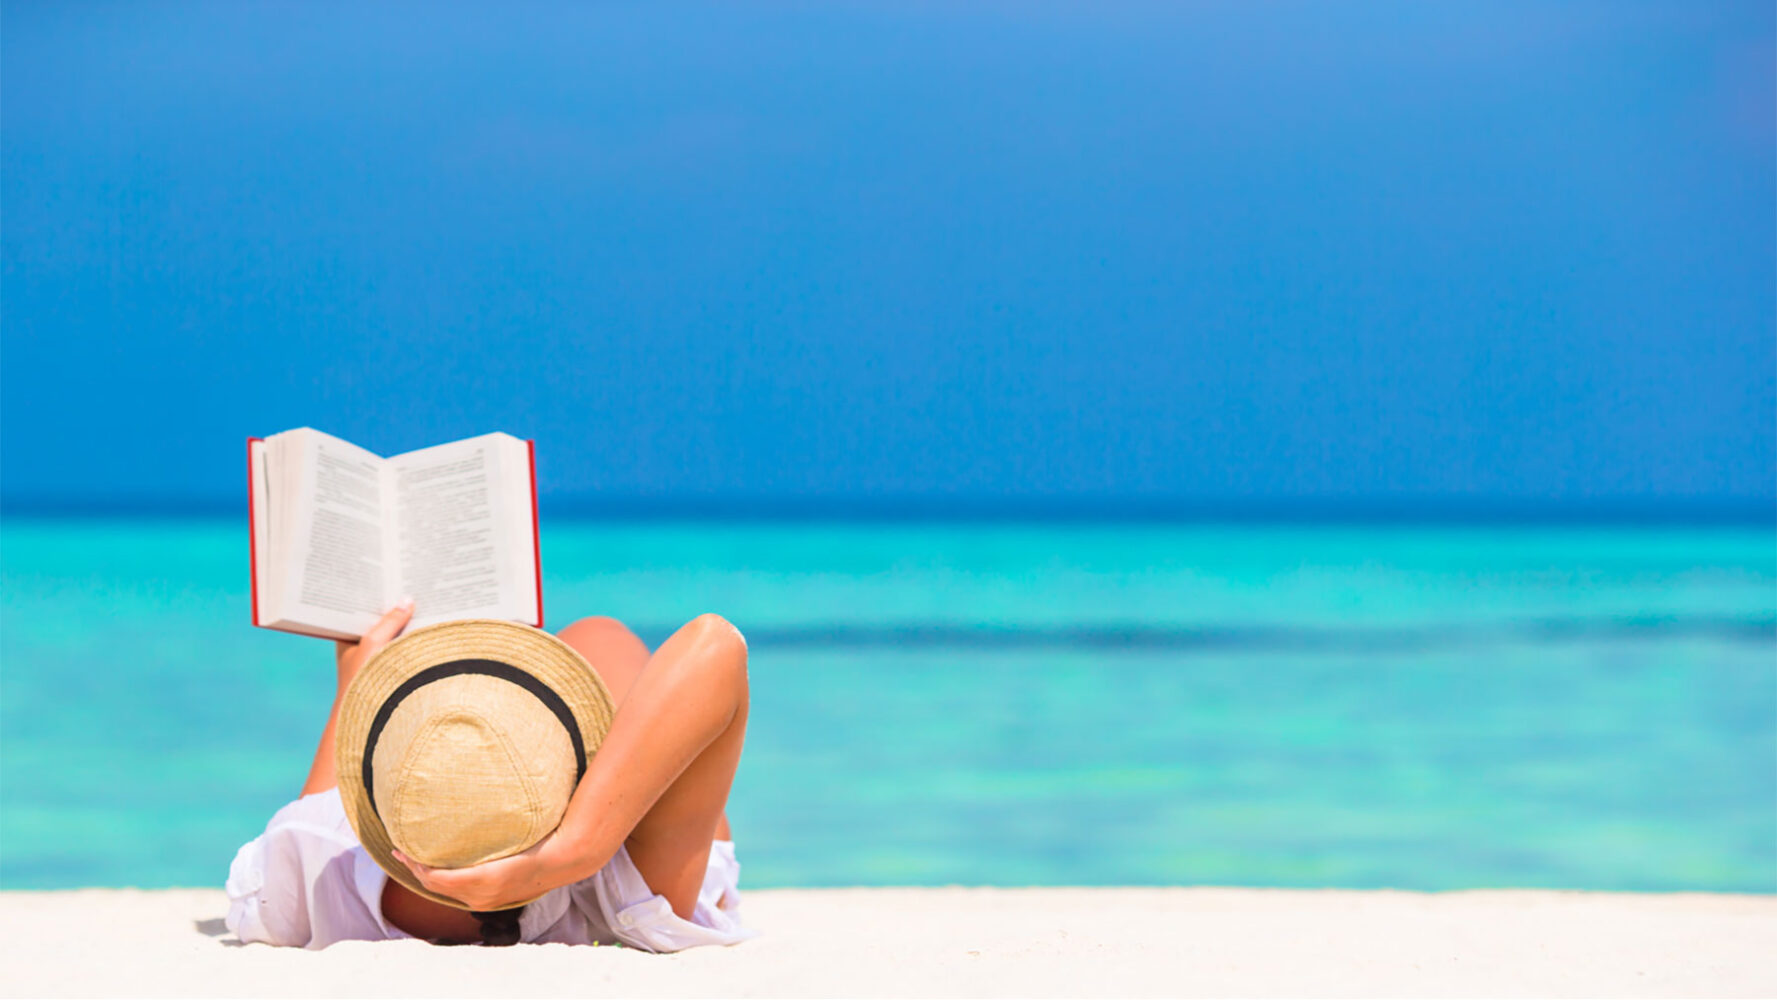 Beach Week! What’s on Your Summer Reading List?